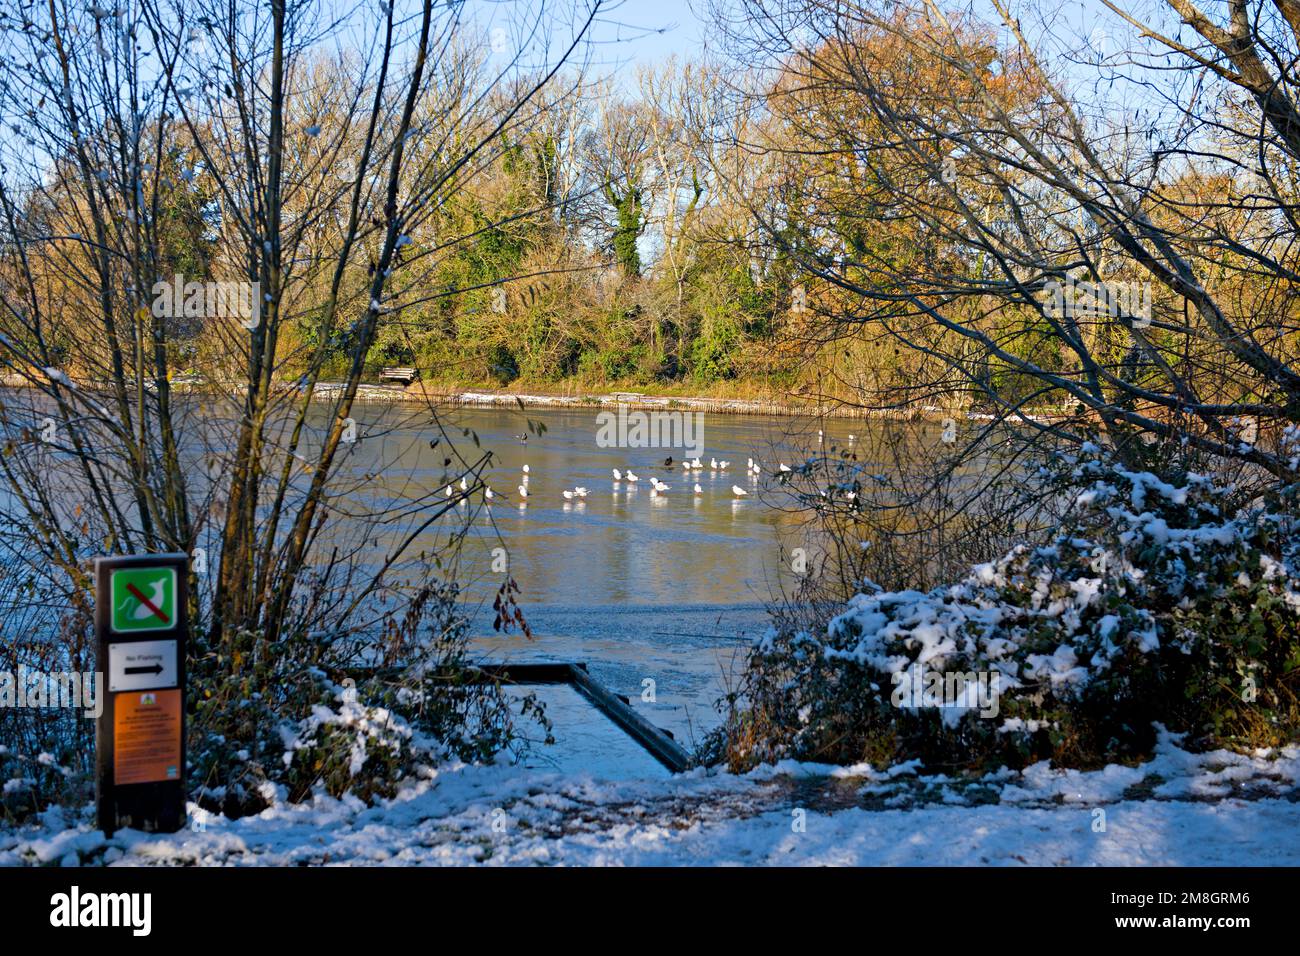 A wintry scene at Barden Lake, Tonbridge, England, during a short cold spell in December 2022 Stock Photo